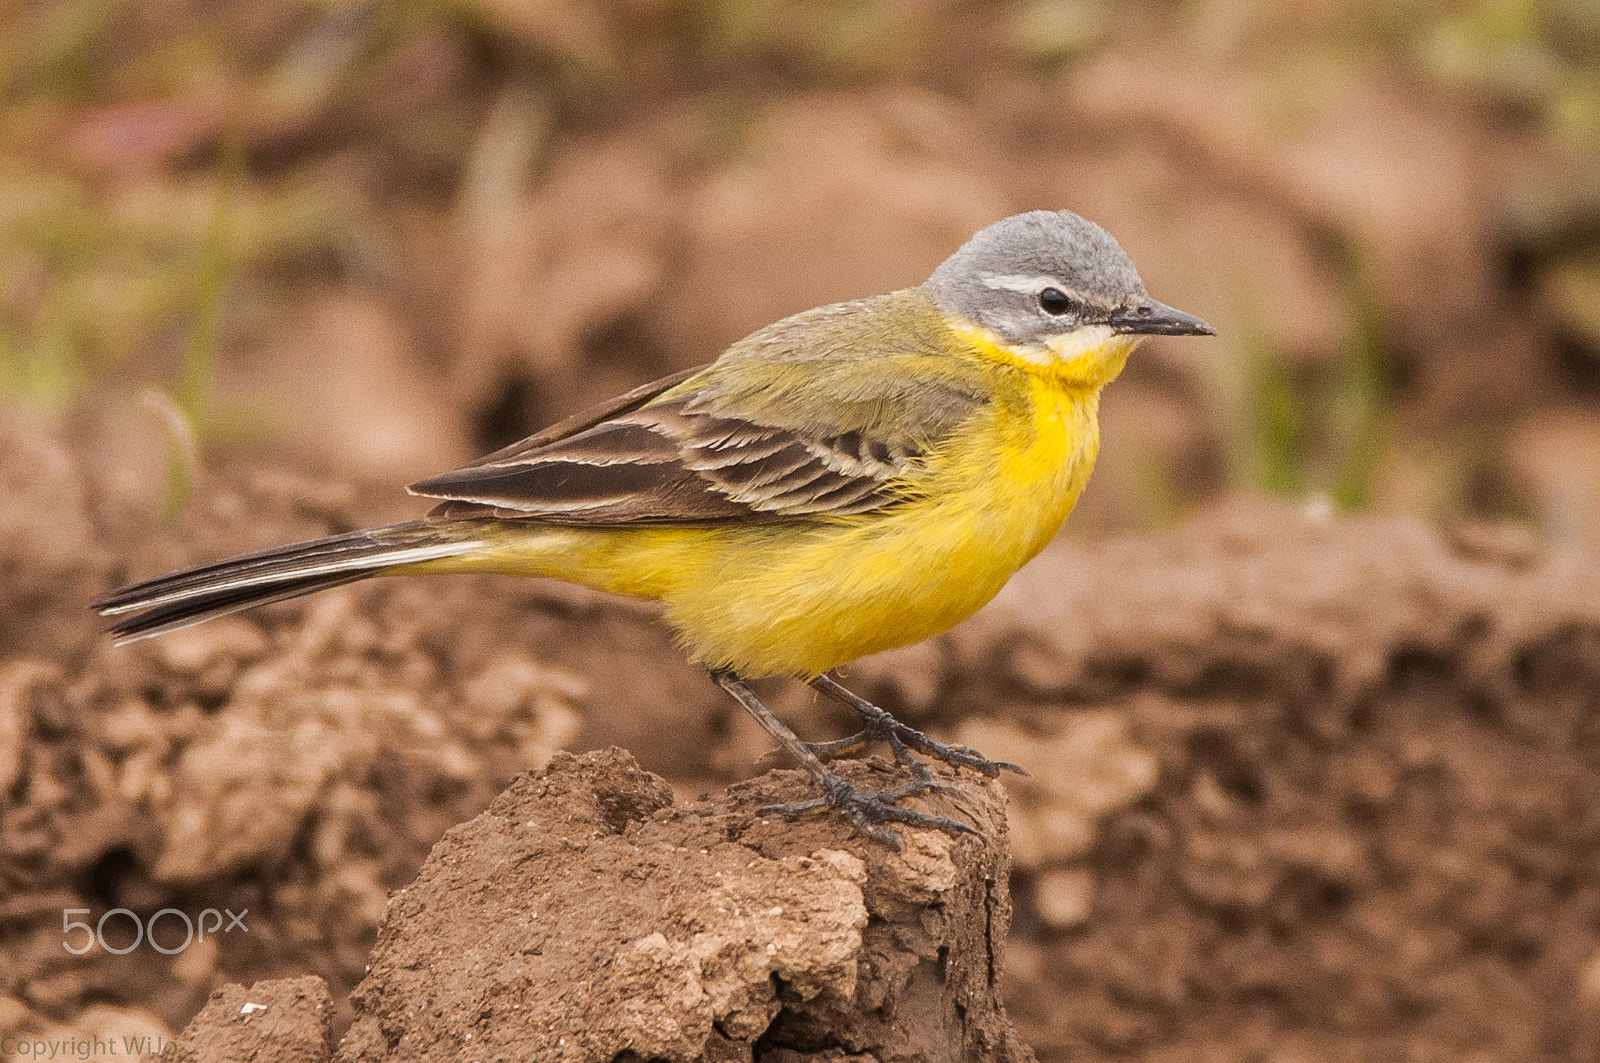 Nikon D90 + Sigma 150-600mm F5-6.3 DG OS HSM | C sample photo. Blue-headed wagtail / gele kwikstaart photography